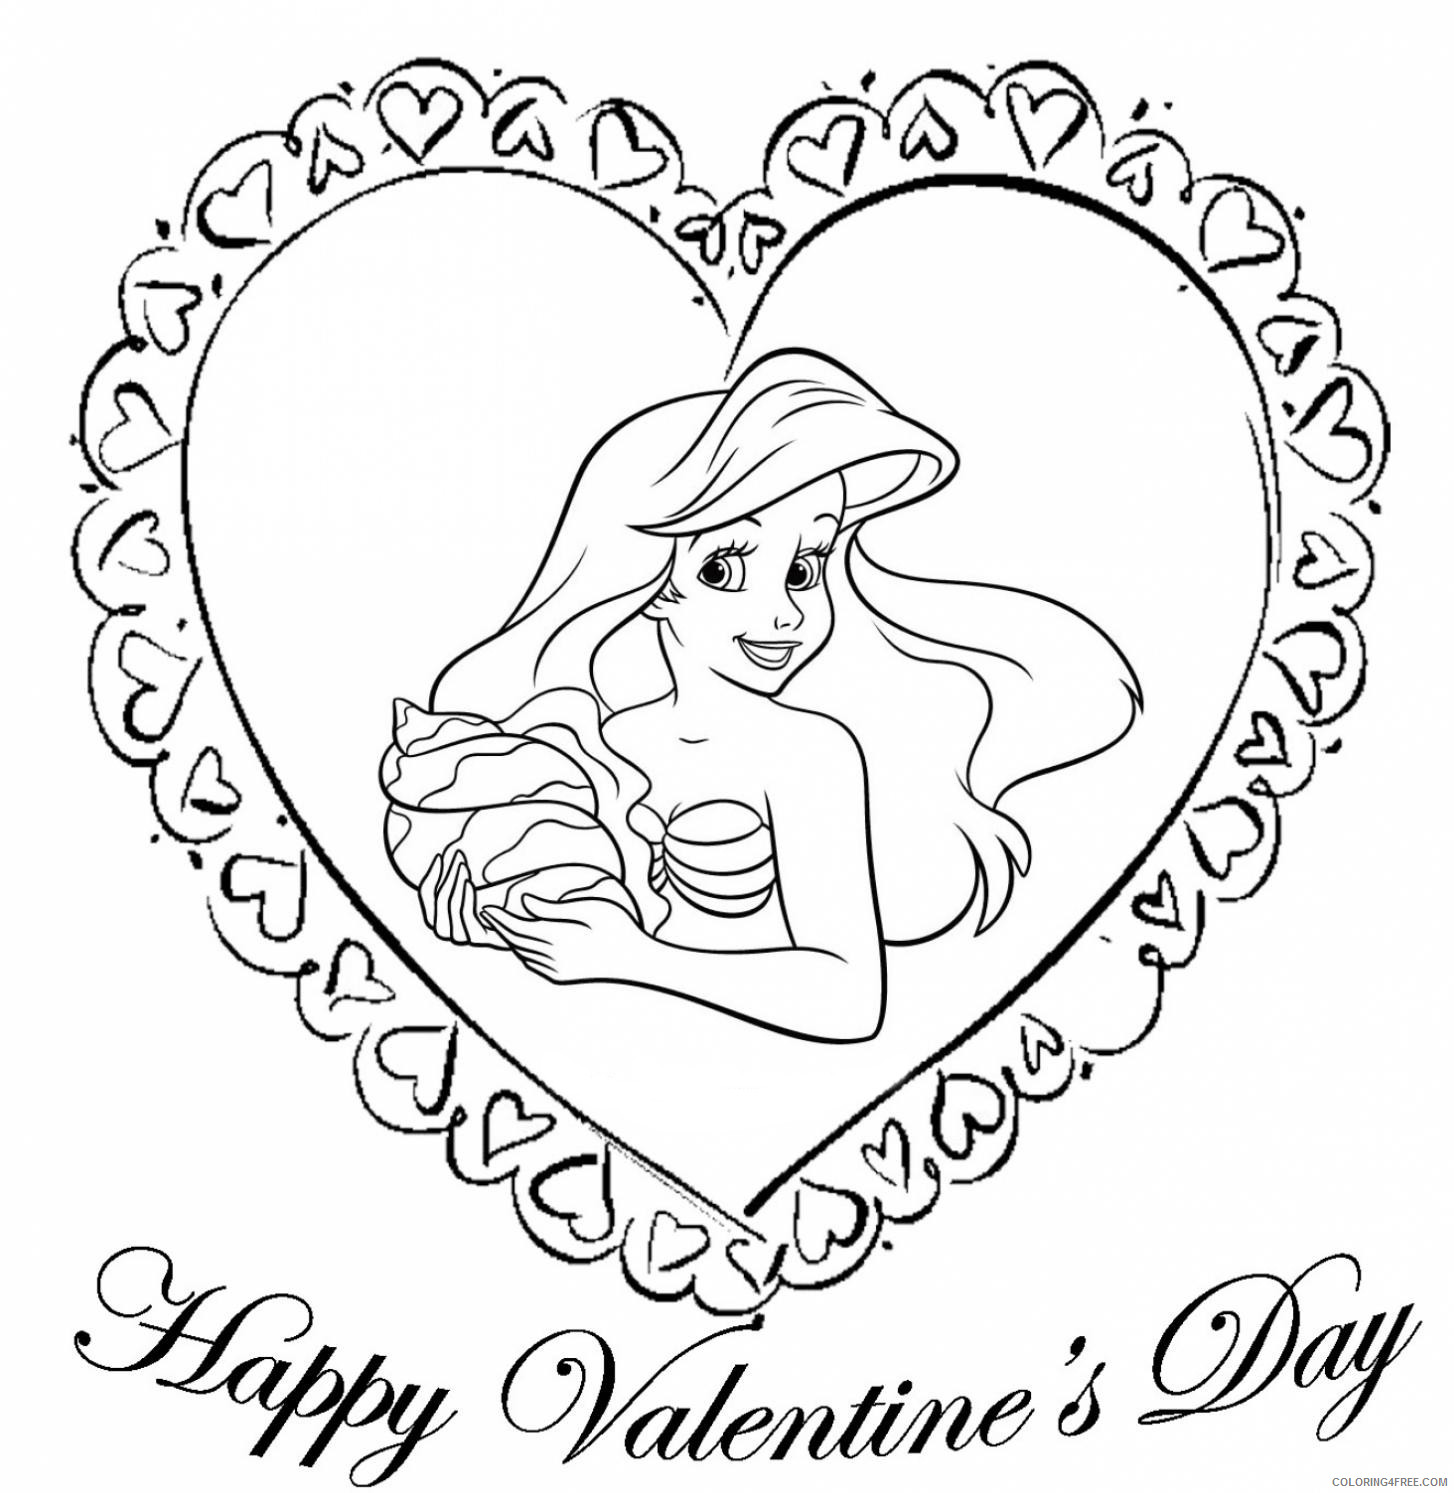 Ariel the Little Mermaid Coloring Pages Cartoons Ariel Valentines Disney Printable 2020 0586 Coloring4free